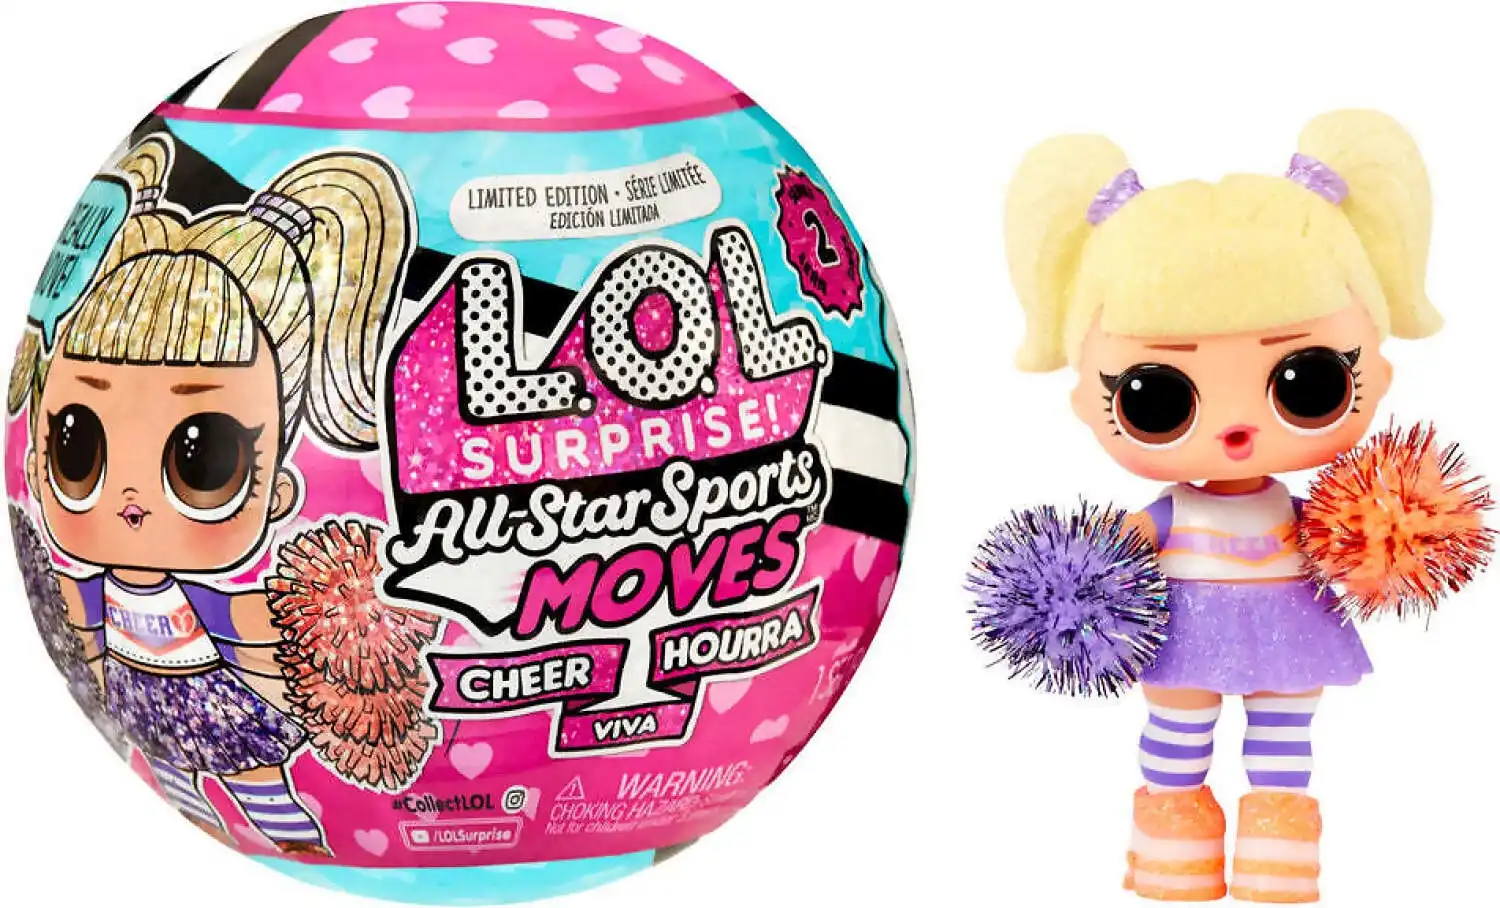 L.o.l Surprise - All Star Sports Moves – Cheer Series 2 Dolls